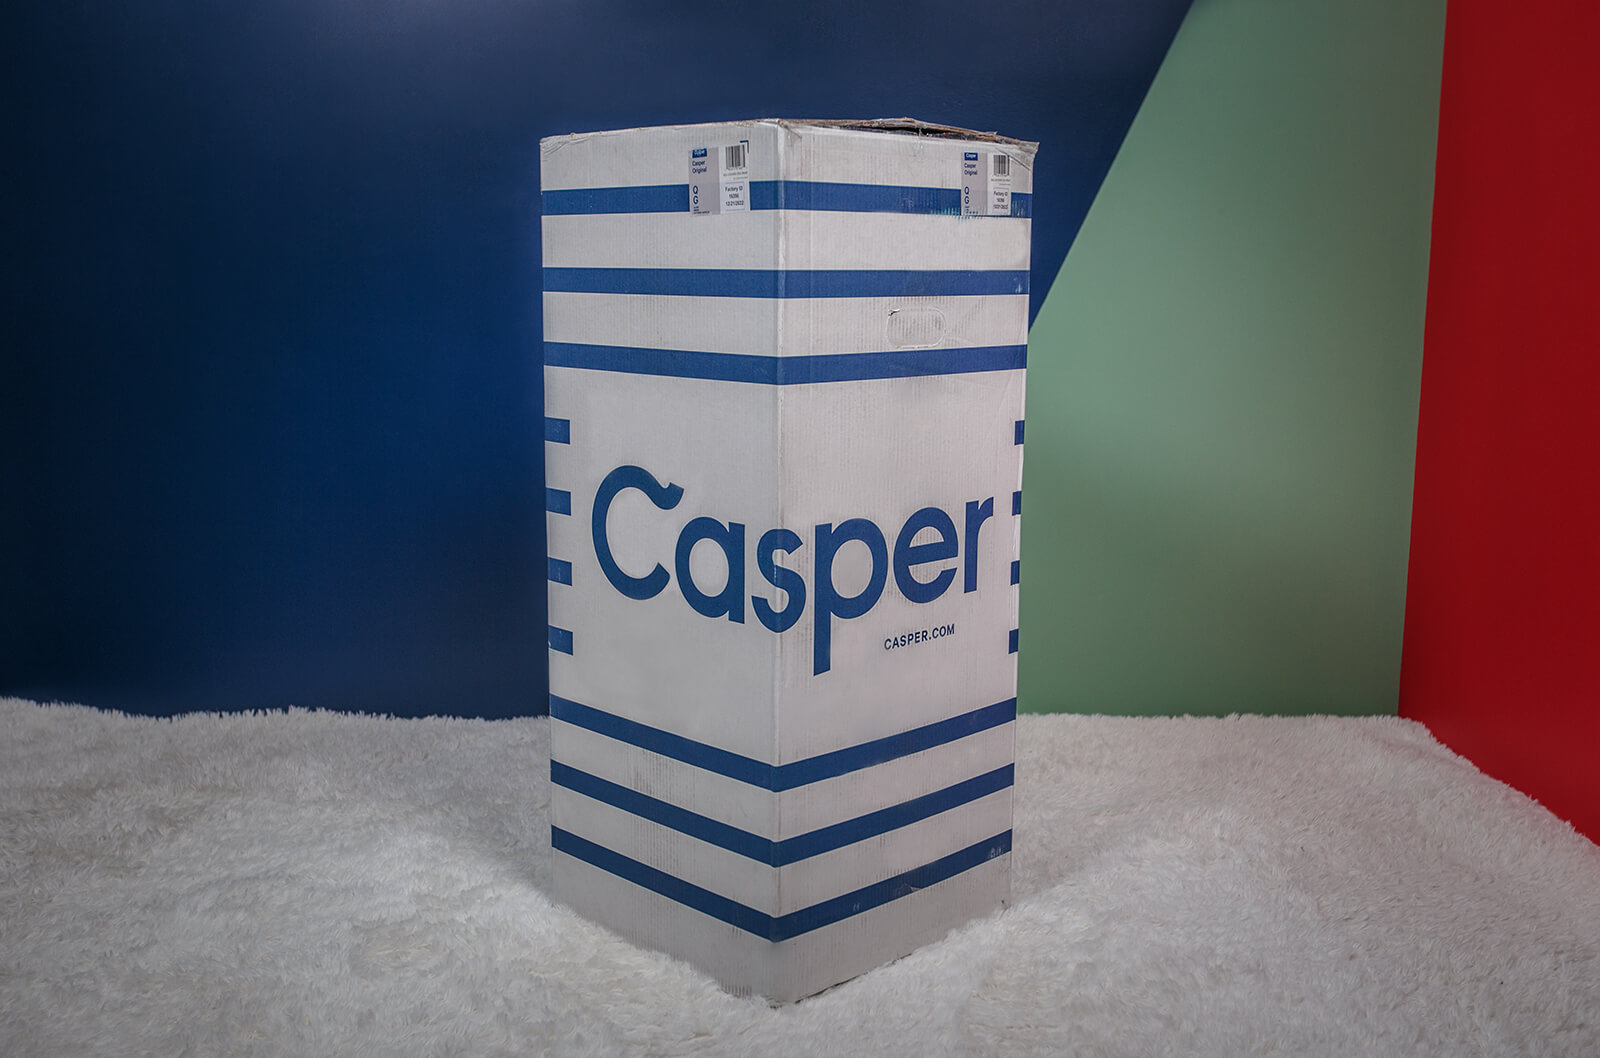 Photo of the Casper Original Mattress box on the floor in a bedroom taken from a front angle.